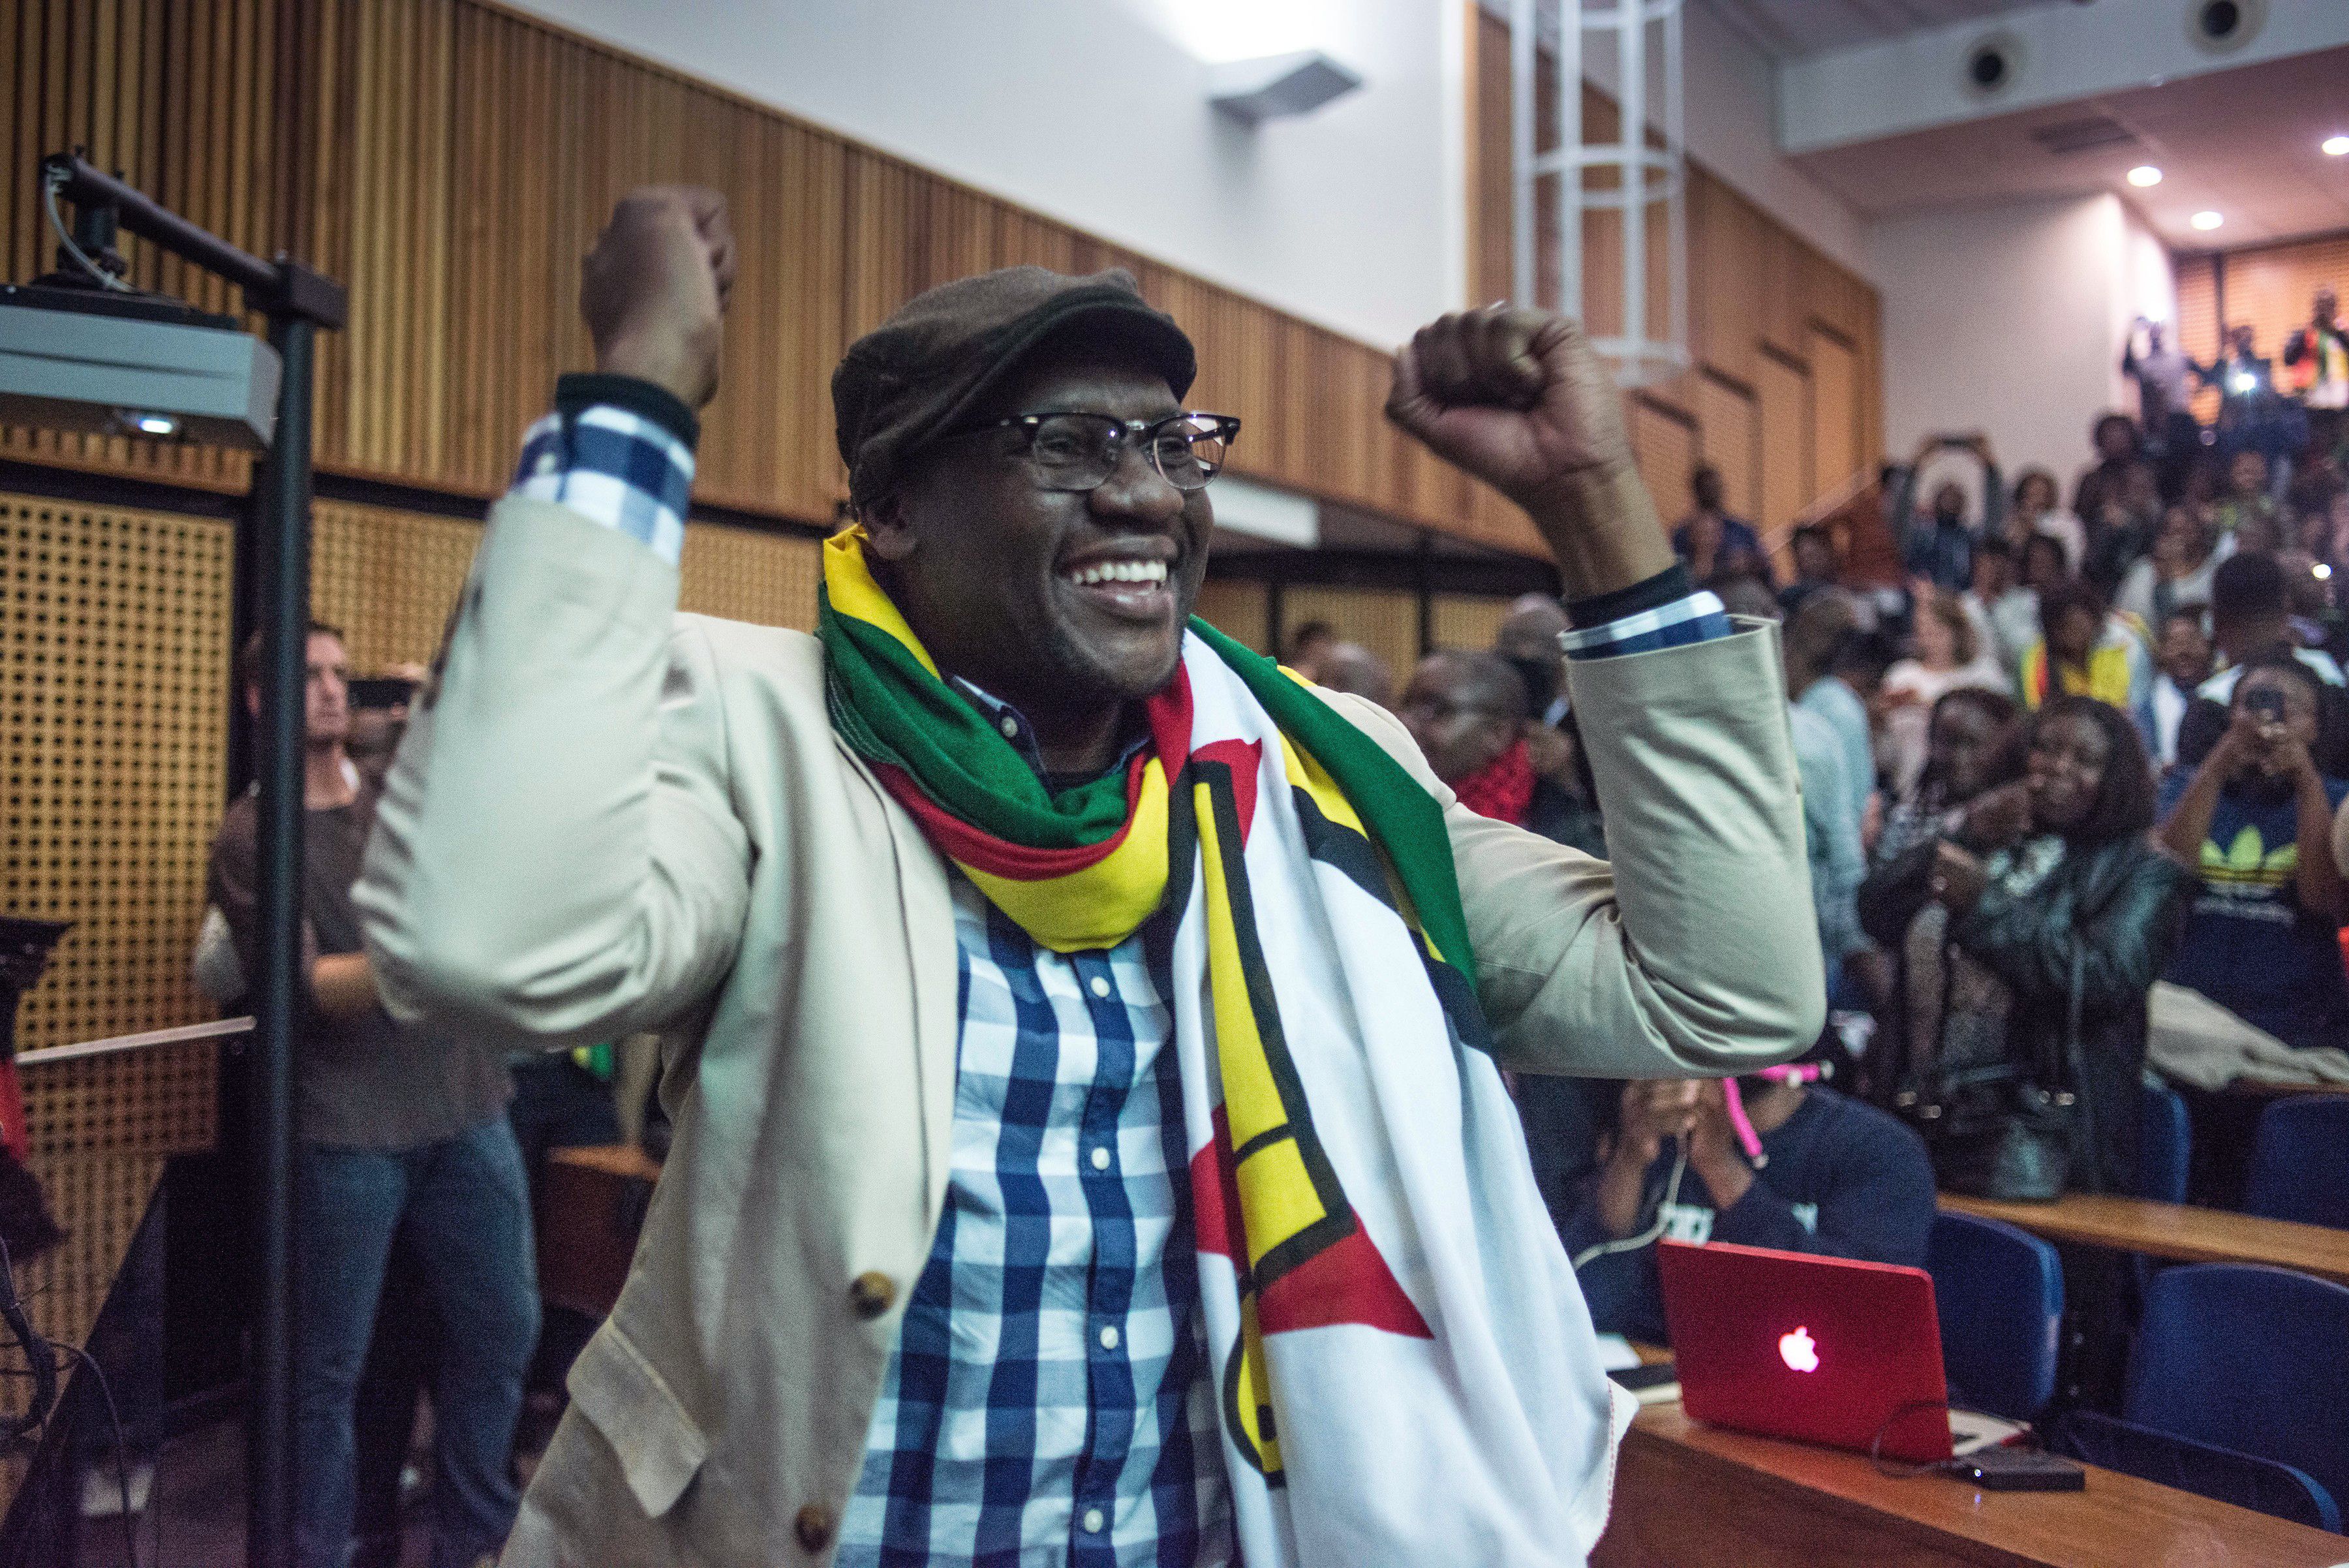 Zimbabwean Pastor Evan Mawarire gestures after addressing students during a lecture at Wits University in Johannesburg, on July 28, 2016.